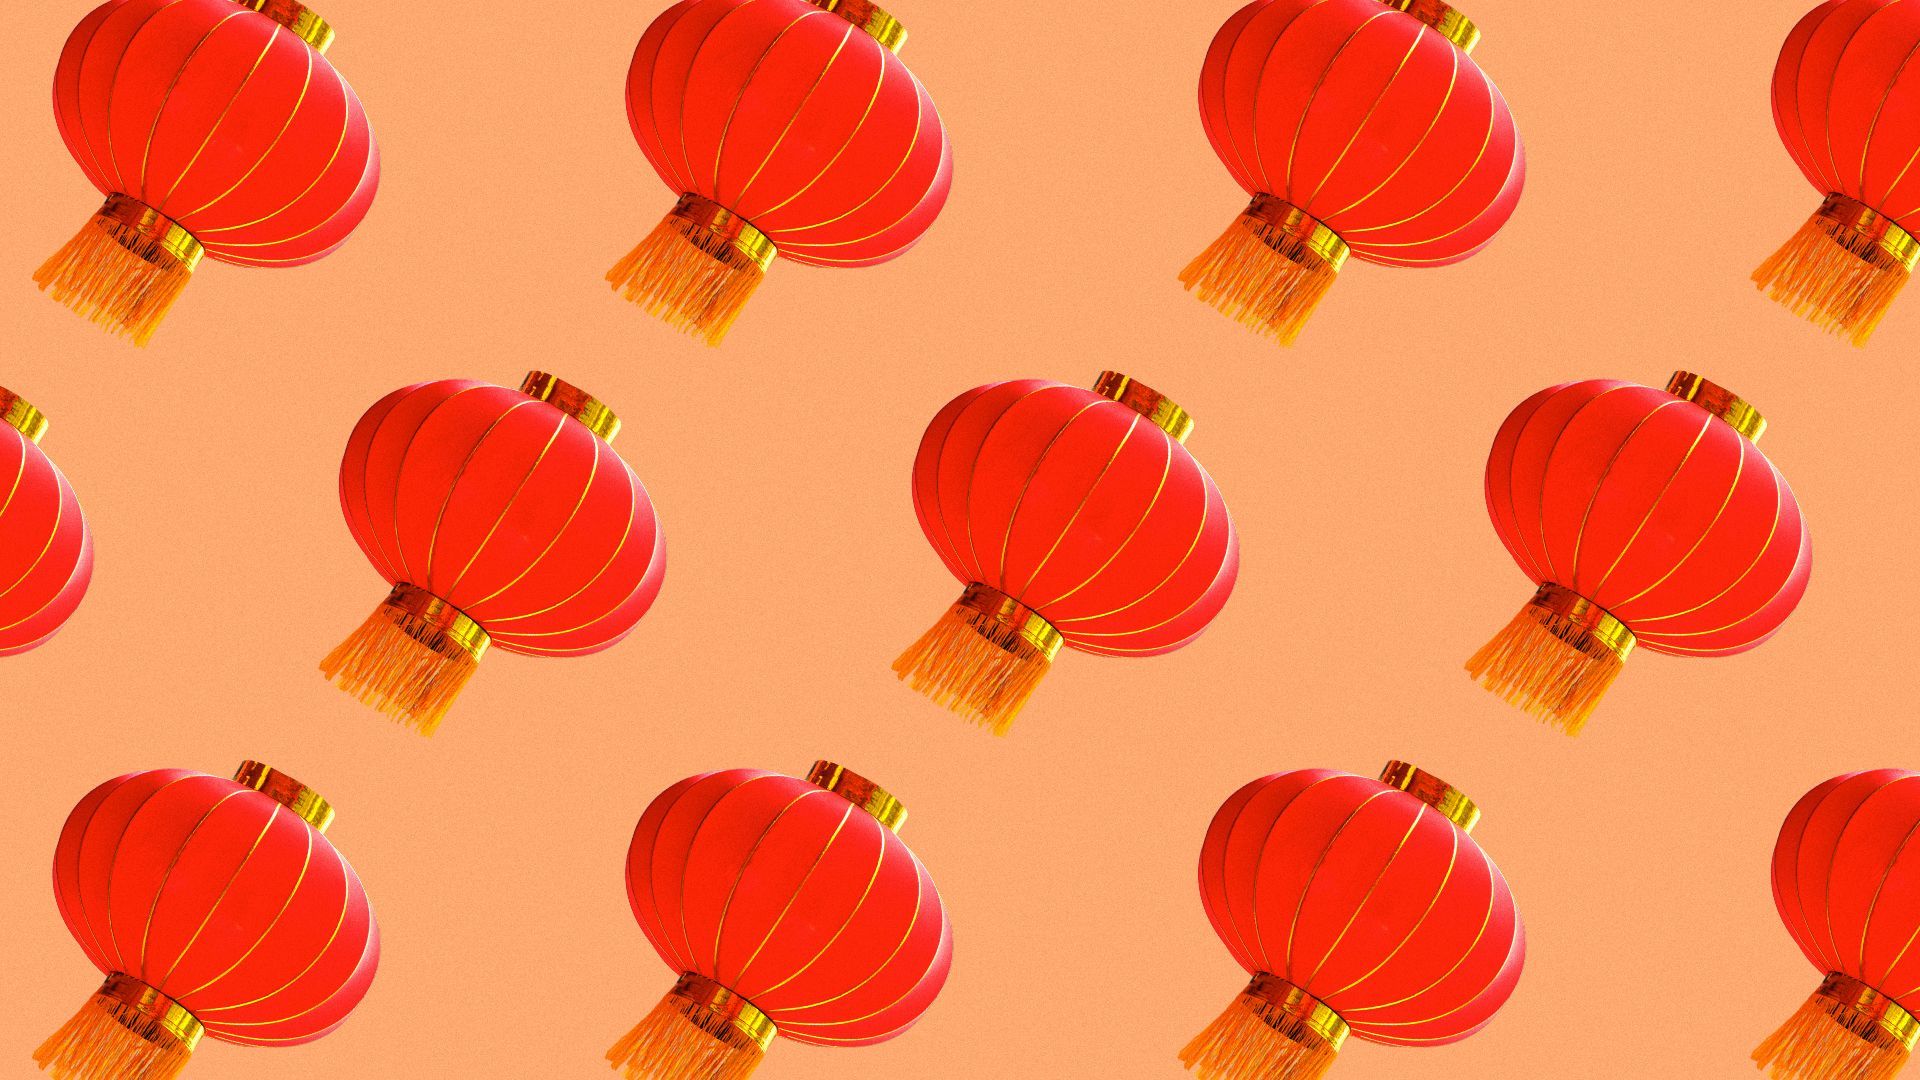 Illustration of red paper lanterns in a repeating pattern.